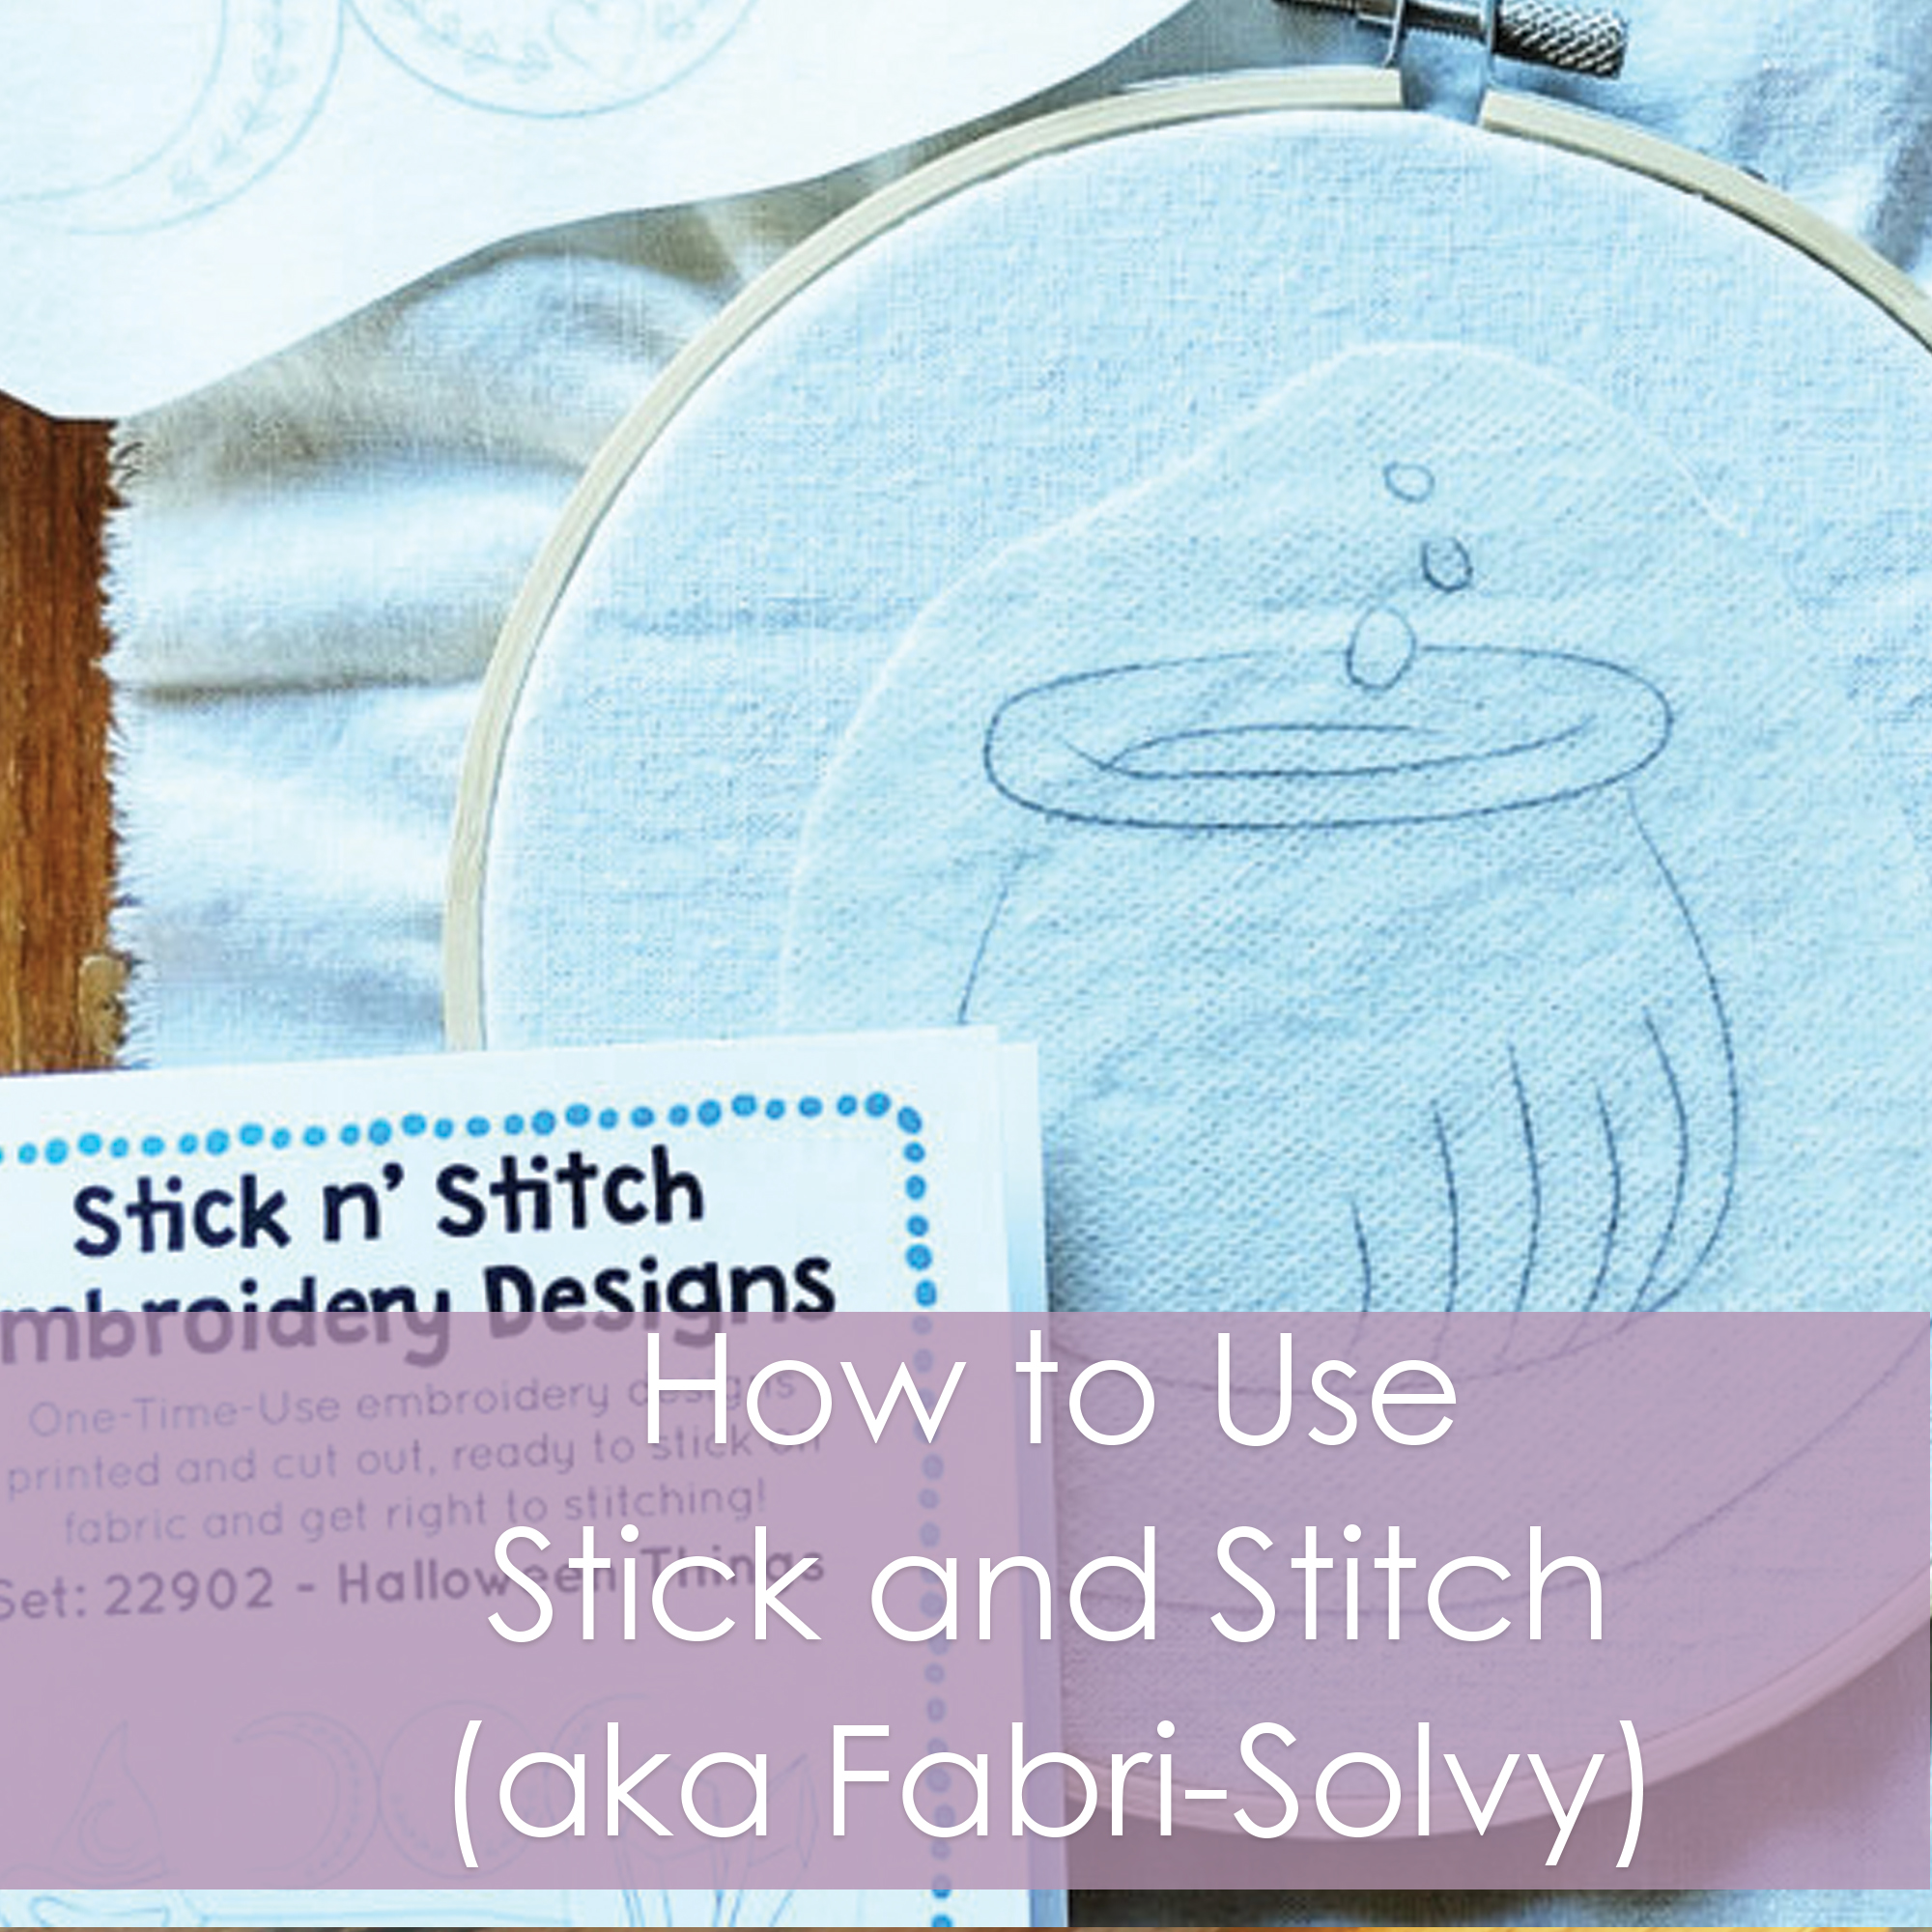 How to Use Stick and Stitch (aka Fabri-Solvy) - a tutorial from Muse of the Morning